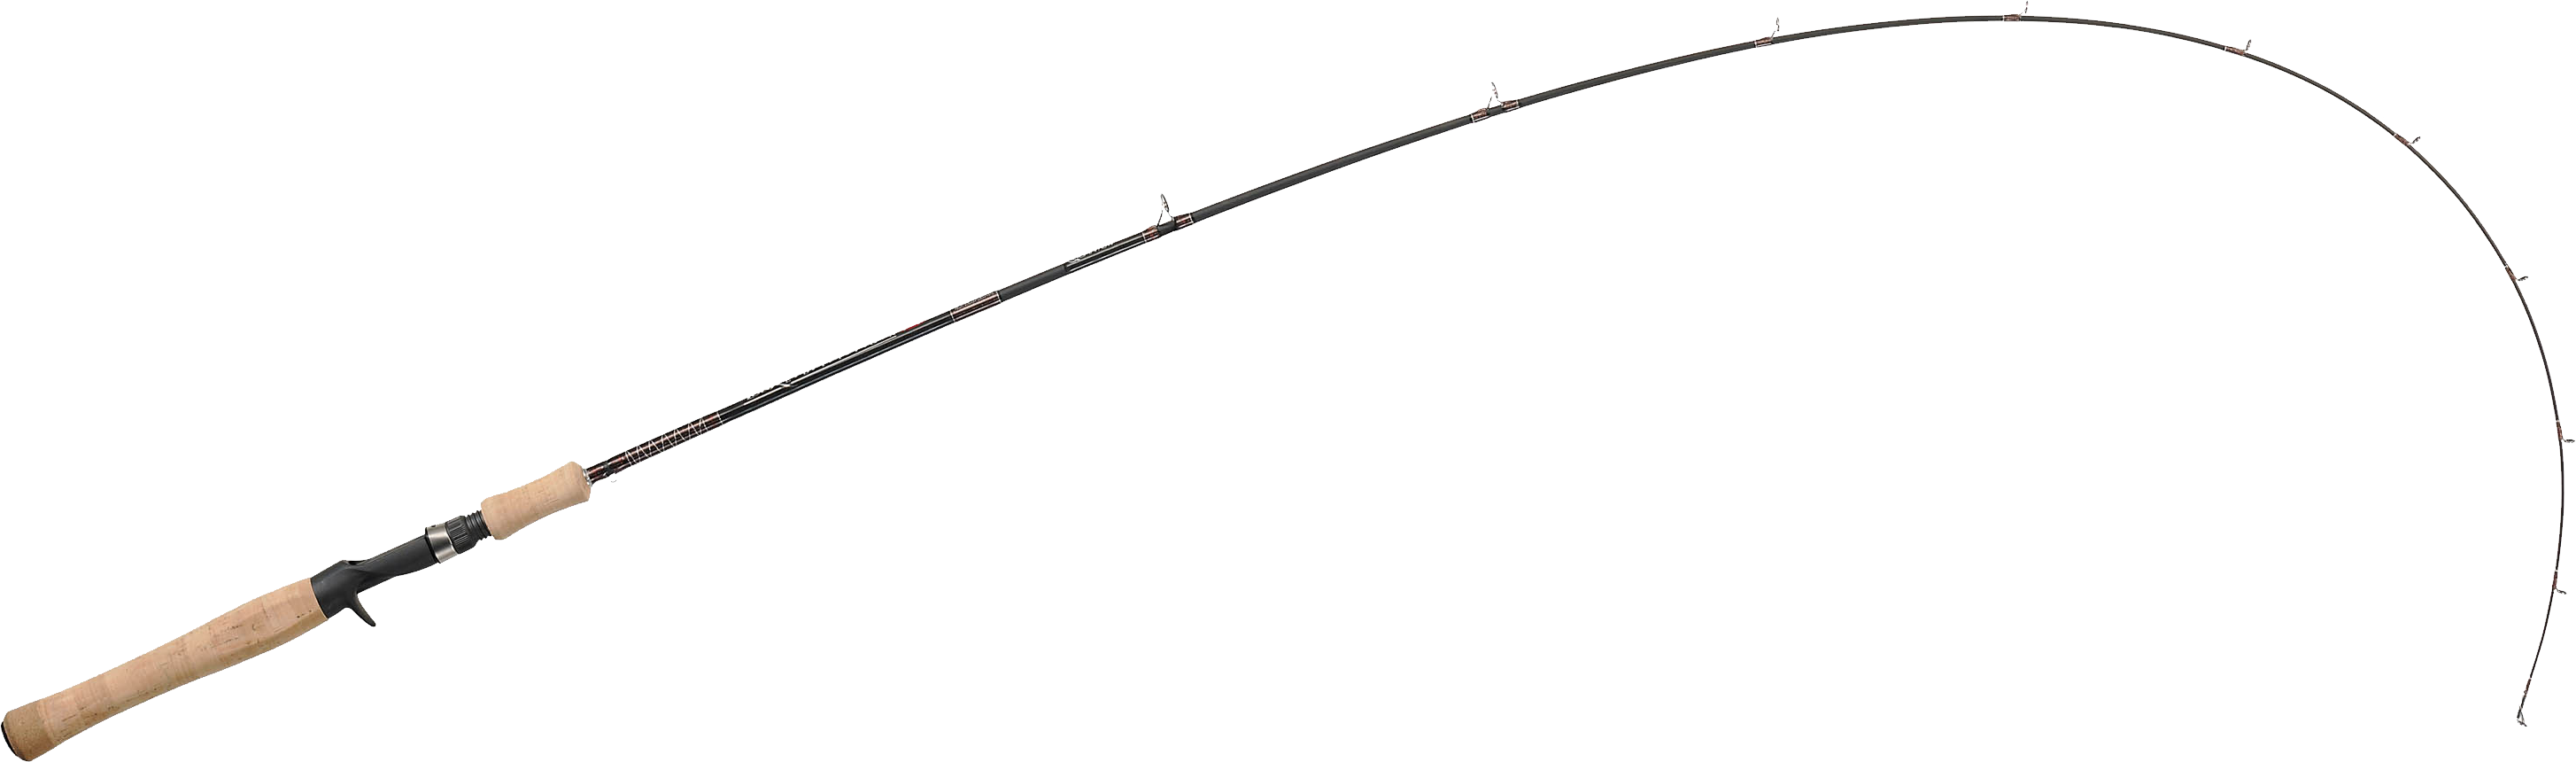 Download Pole Rod Stick Fishing Free Clipart HQ HQ PNG Image